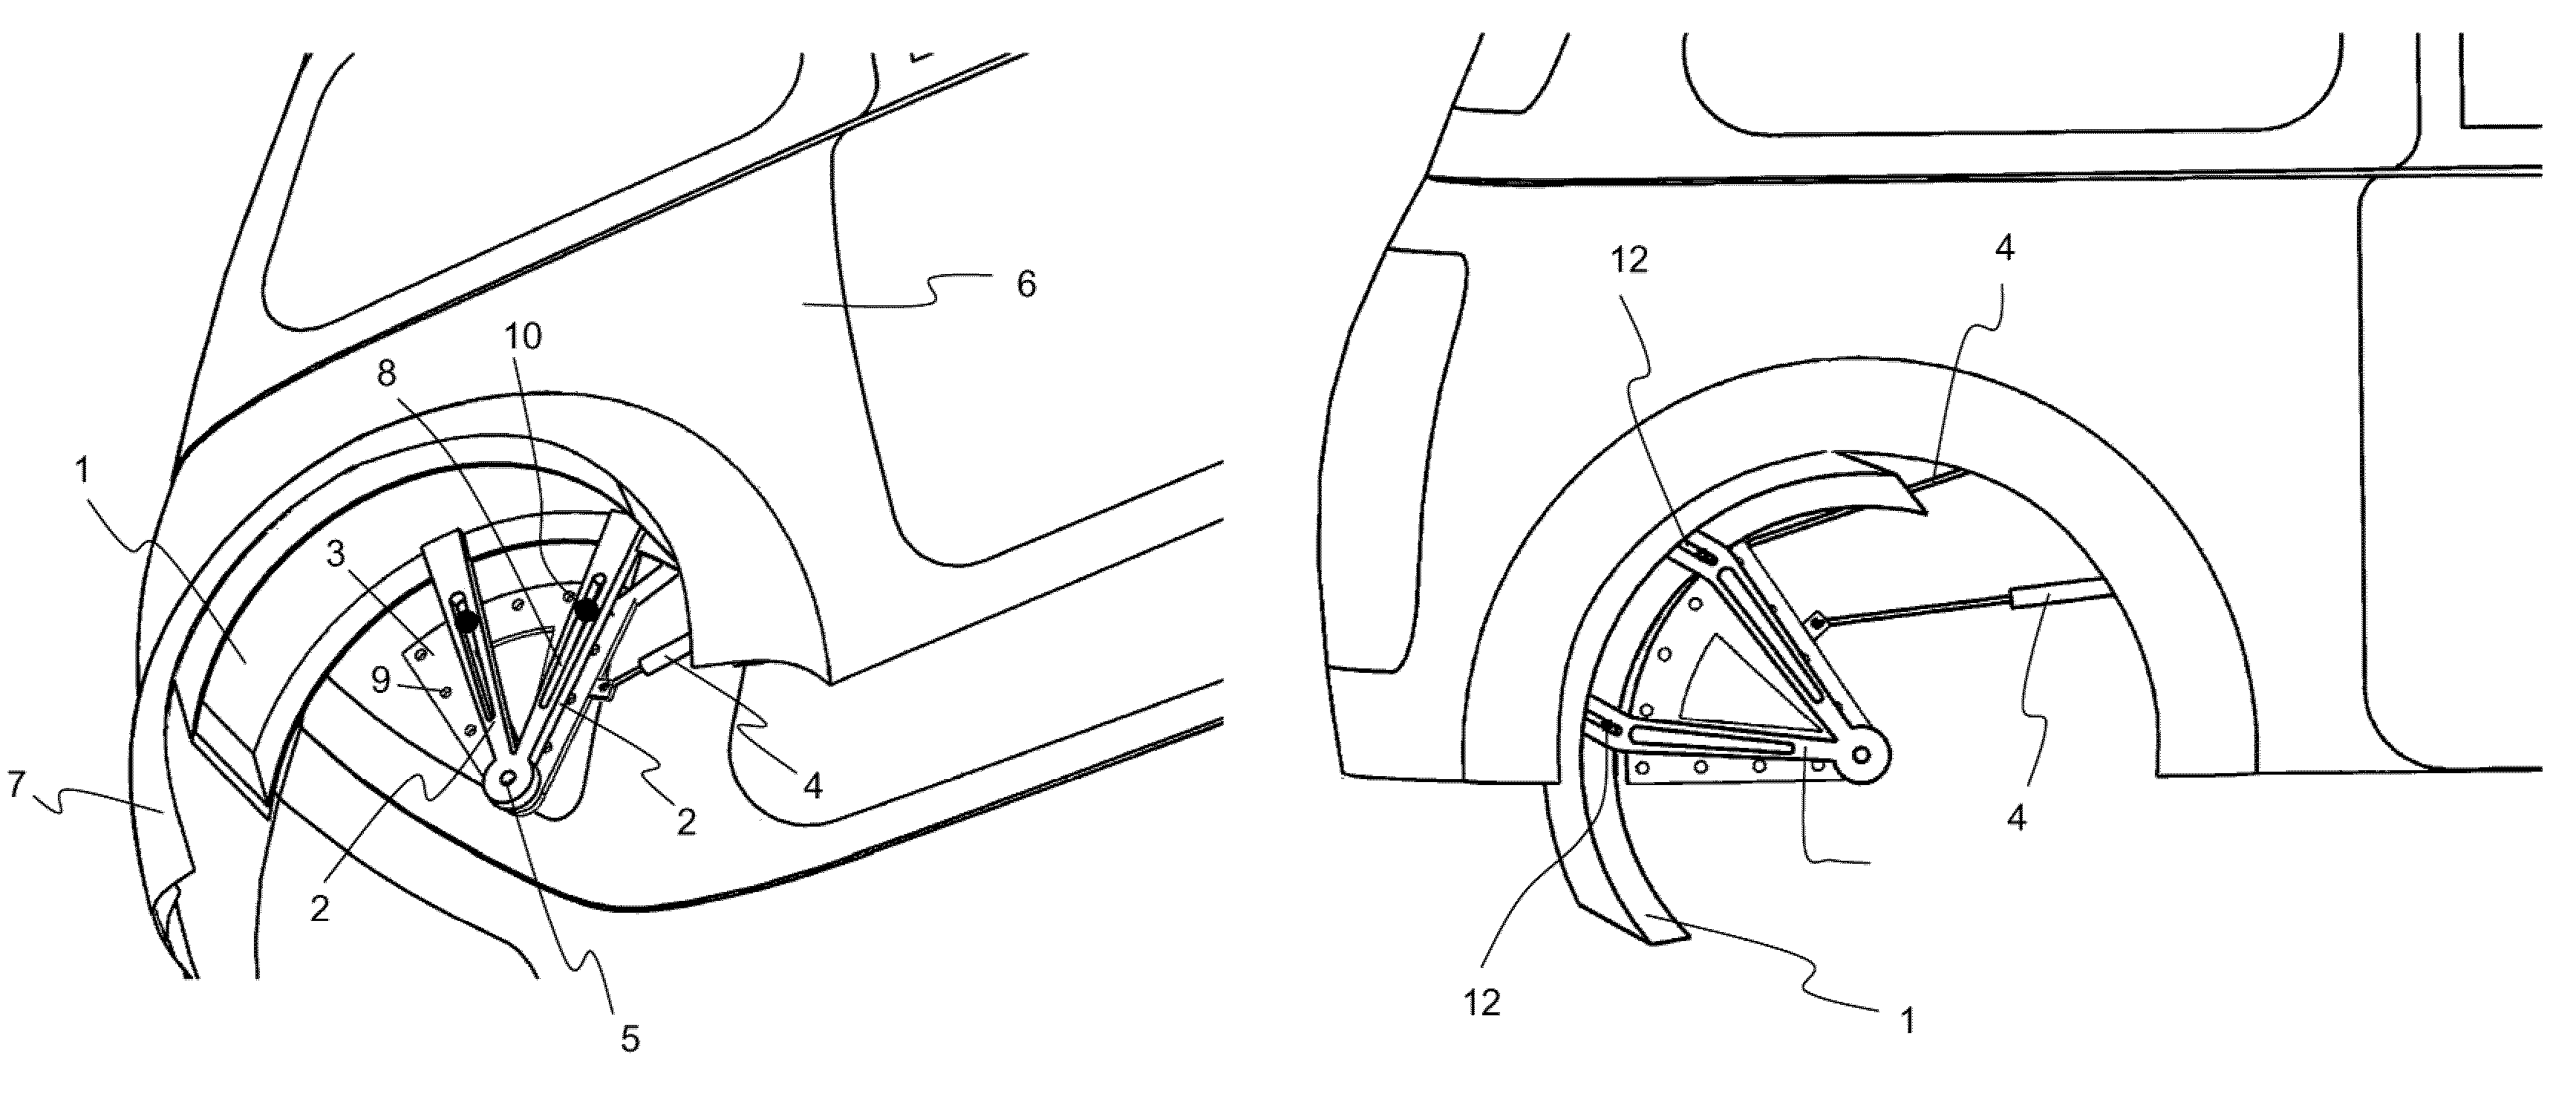 Retractable Mud Flap For Vehicles